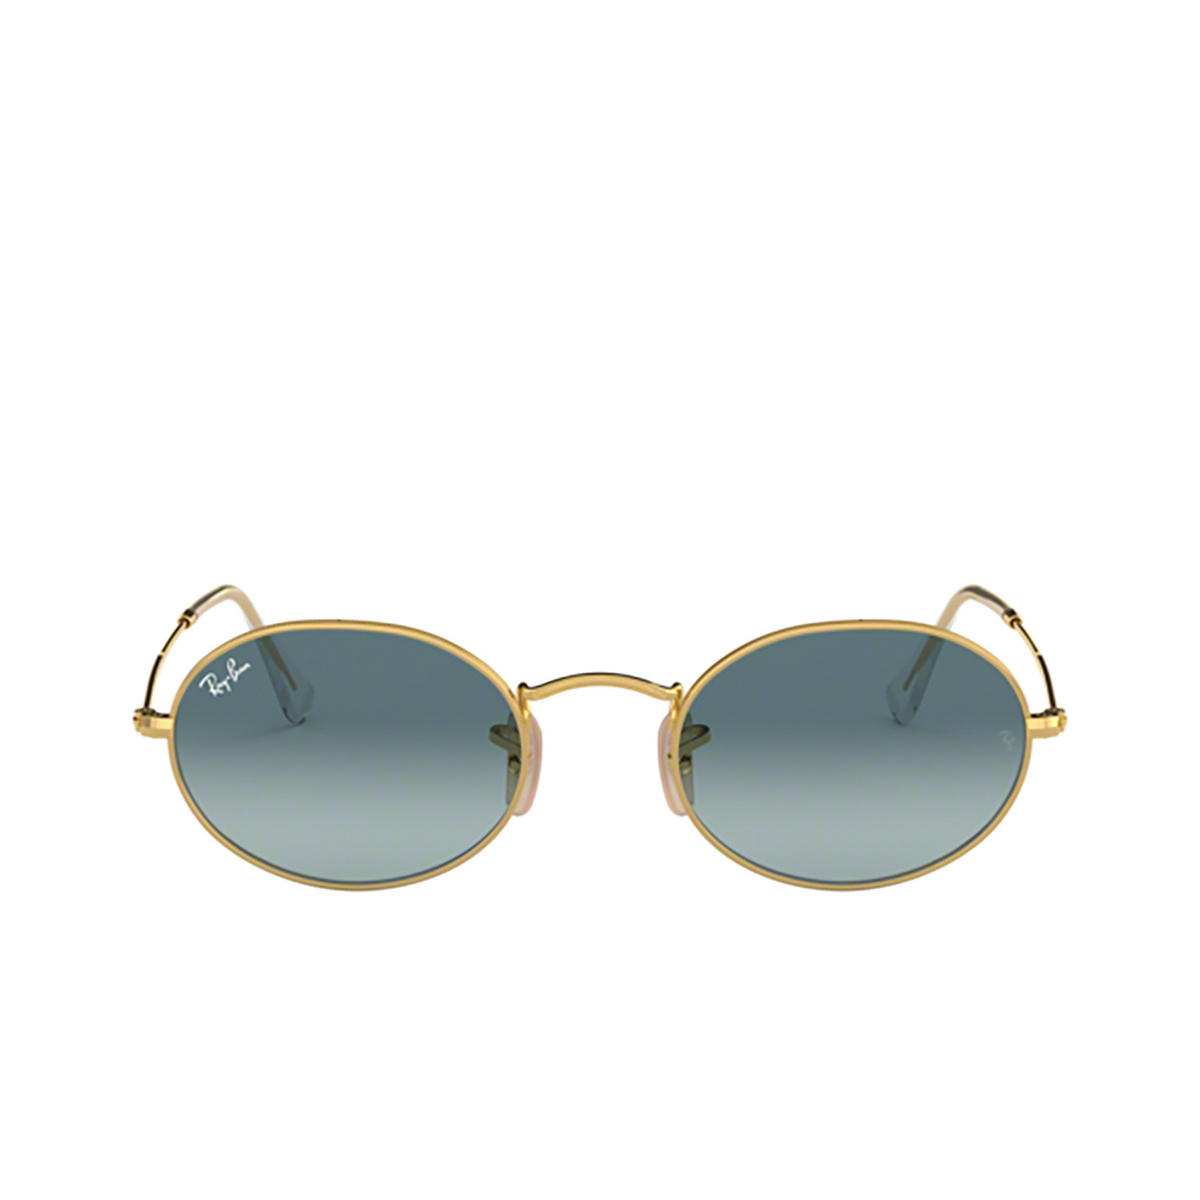 Ray-Ban OVAL Sunglasses 001/3M ARISTA - front view